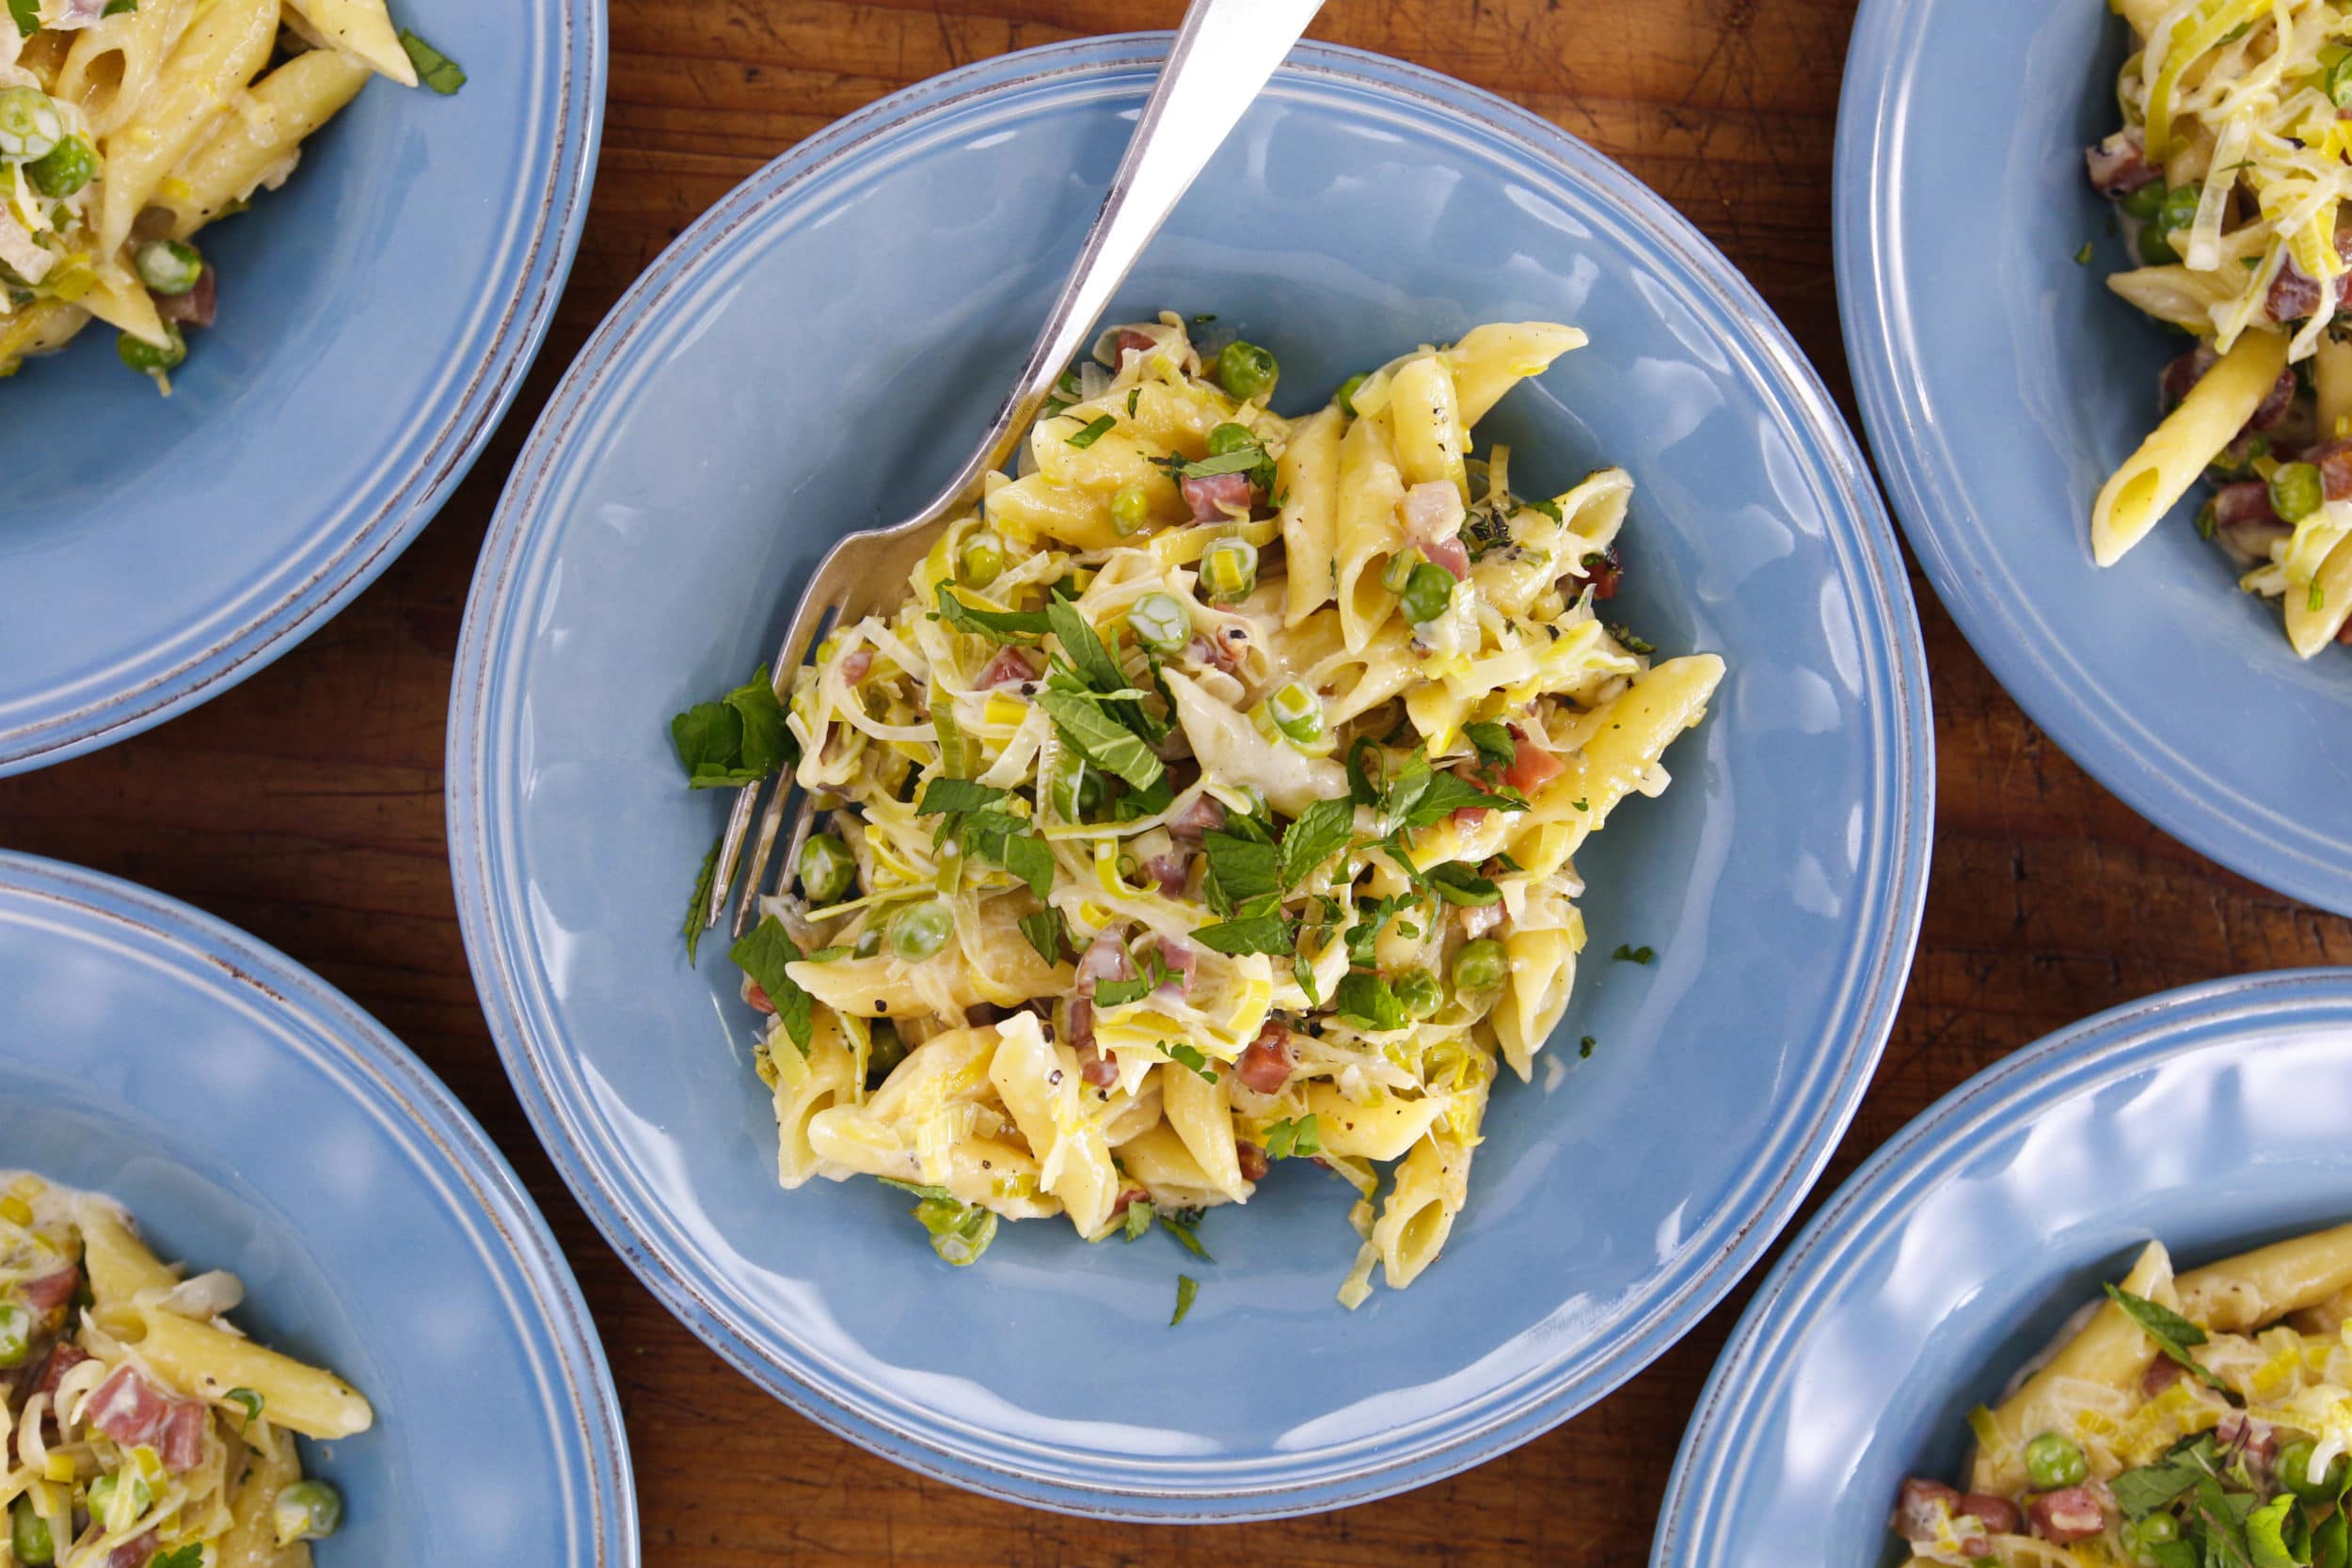 Penne with Prosciutto, Peas and Leeks in Cream Sauce